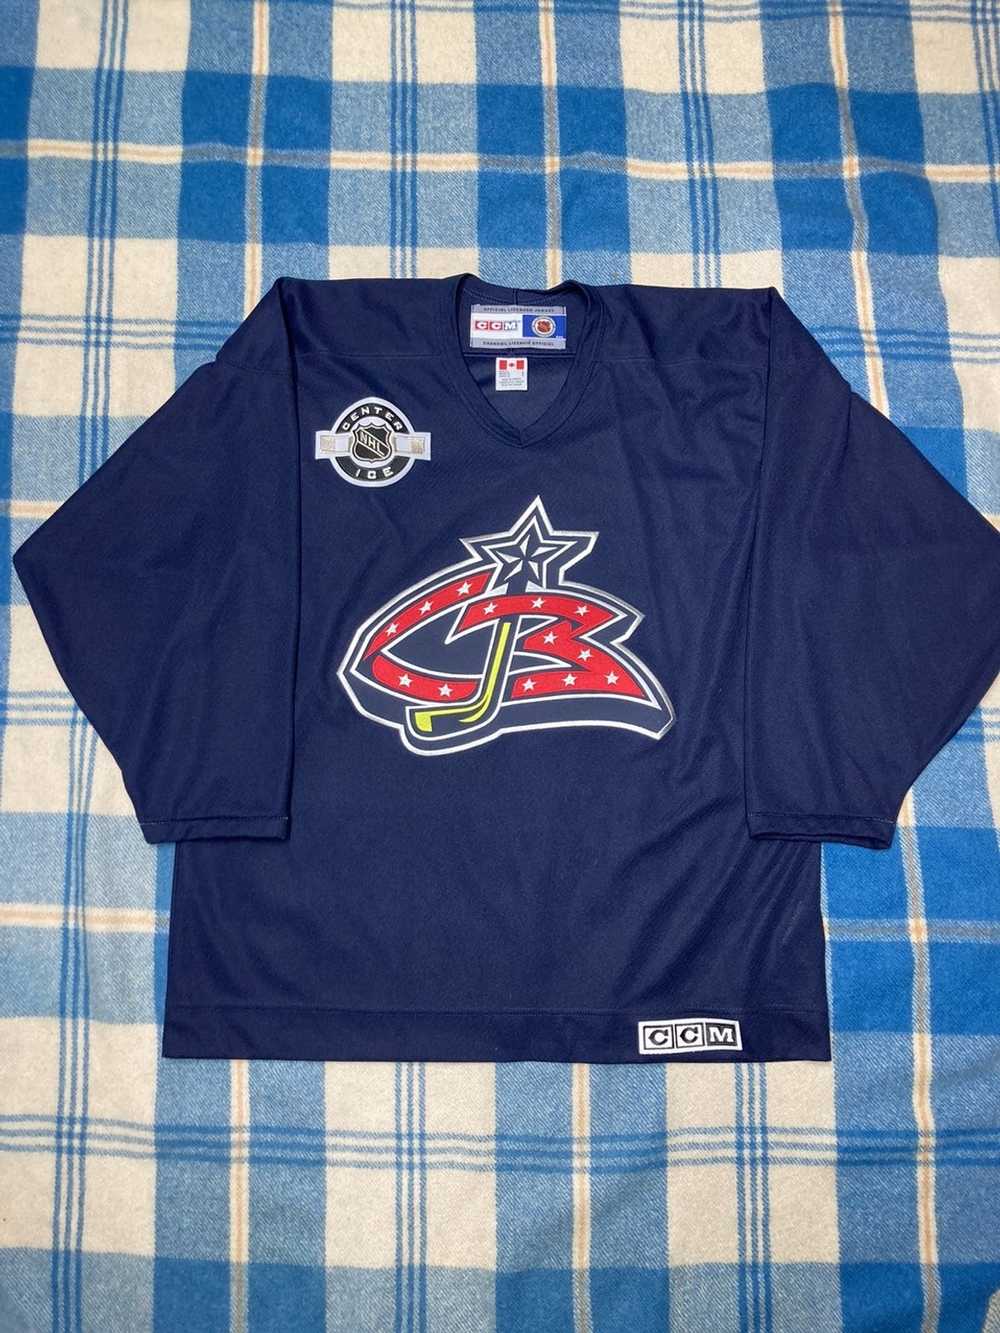 PolyCottonVintage Kids L Vintage 90s Columbus Blue Jackets Home CCM Player Issue NHL Ice Hockey NHL Jersey Shirt Long Sleeved Made in USA Size Mens L